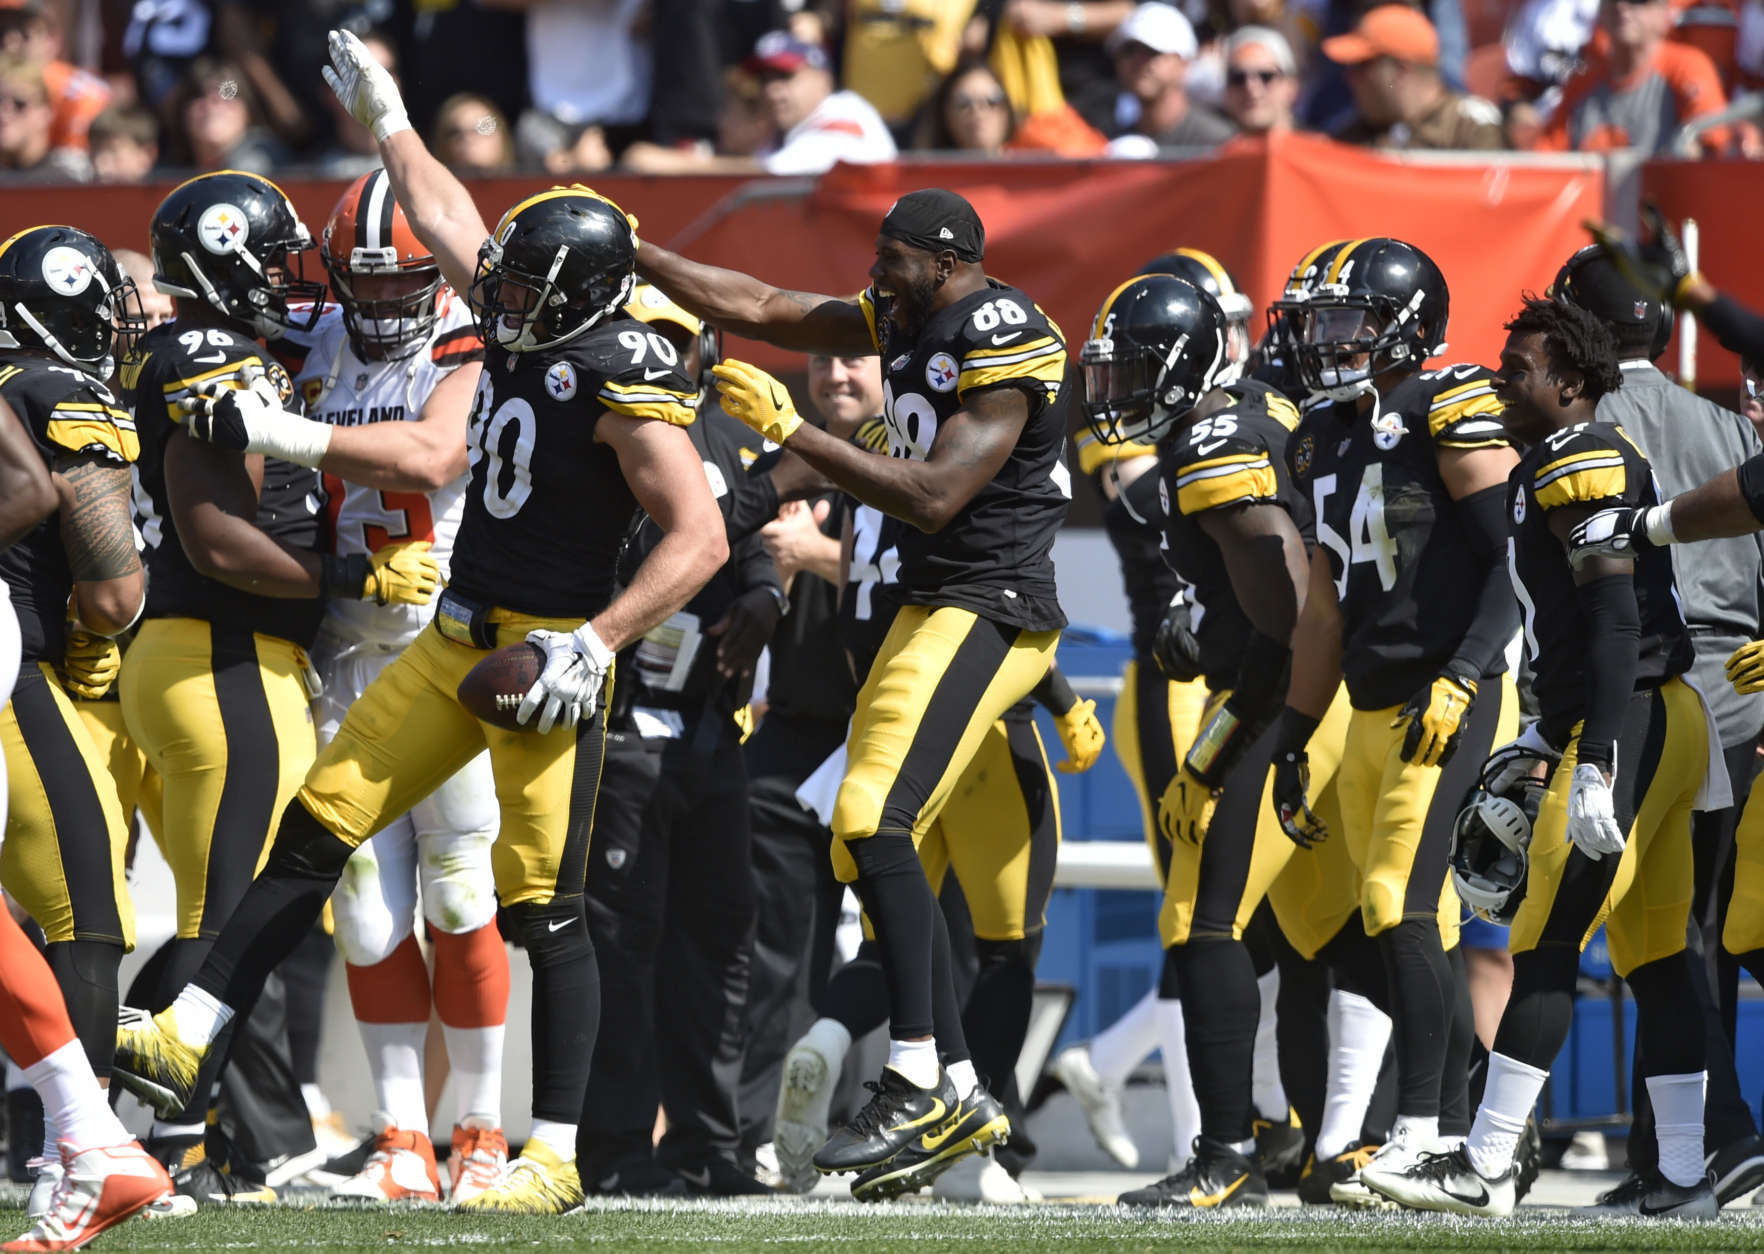 Pittsburgh Steelers linebacker T.J. Watt (90) celebrates with teammates after making an interception during the second half of an NFL football game against the Cleveland Browns, Sunday, Sept. 10, 2017, in Cleveland. (AP Photo/David Richard)